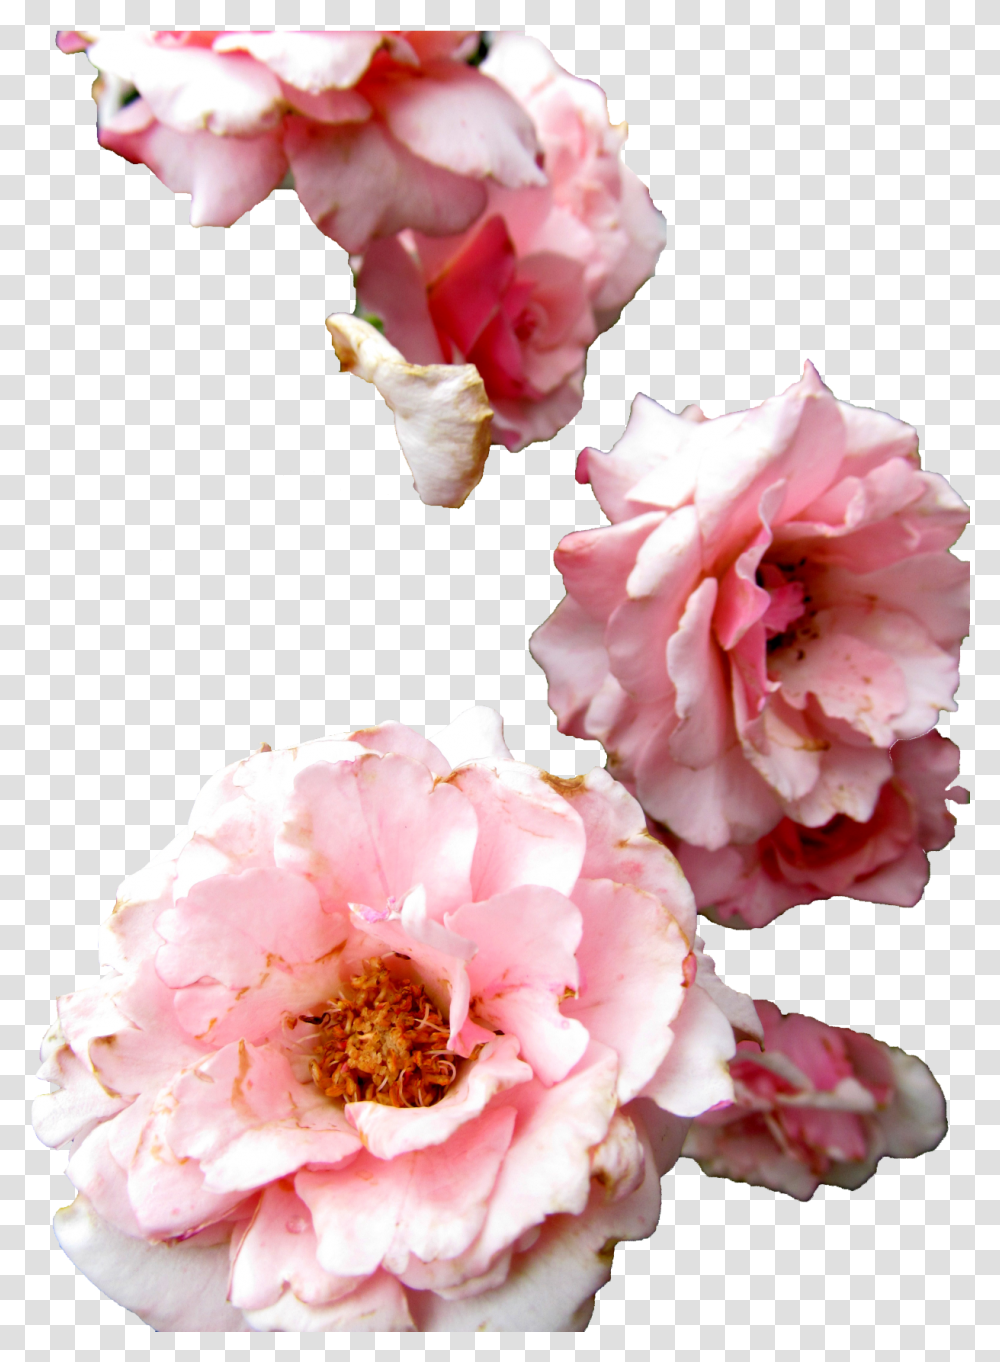 Flowers Roses Flowers Rose Red Peony On Background, Plant, Blossom, Geranium, Petal Transparent Png